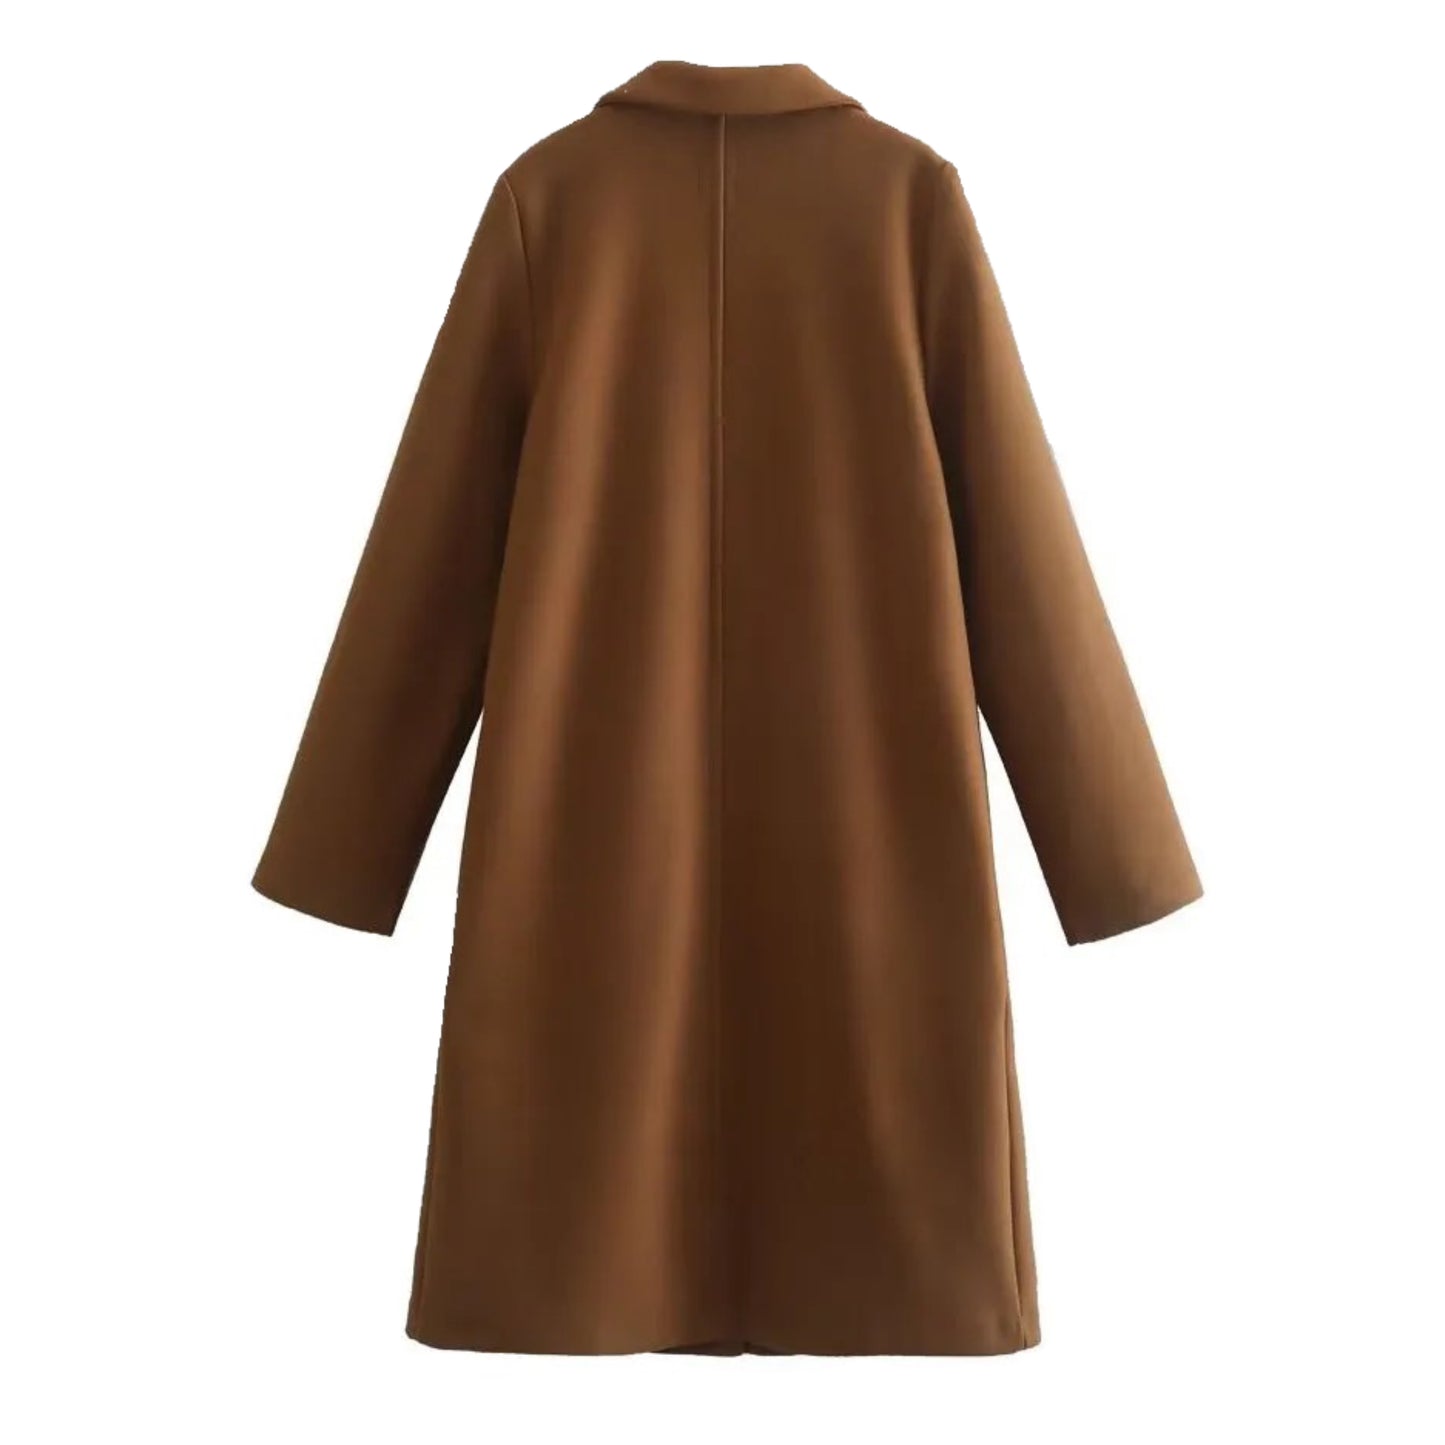 Autumn Brown Knit Trench Coat